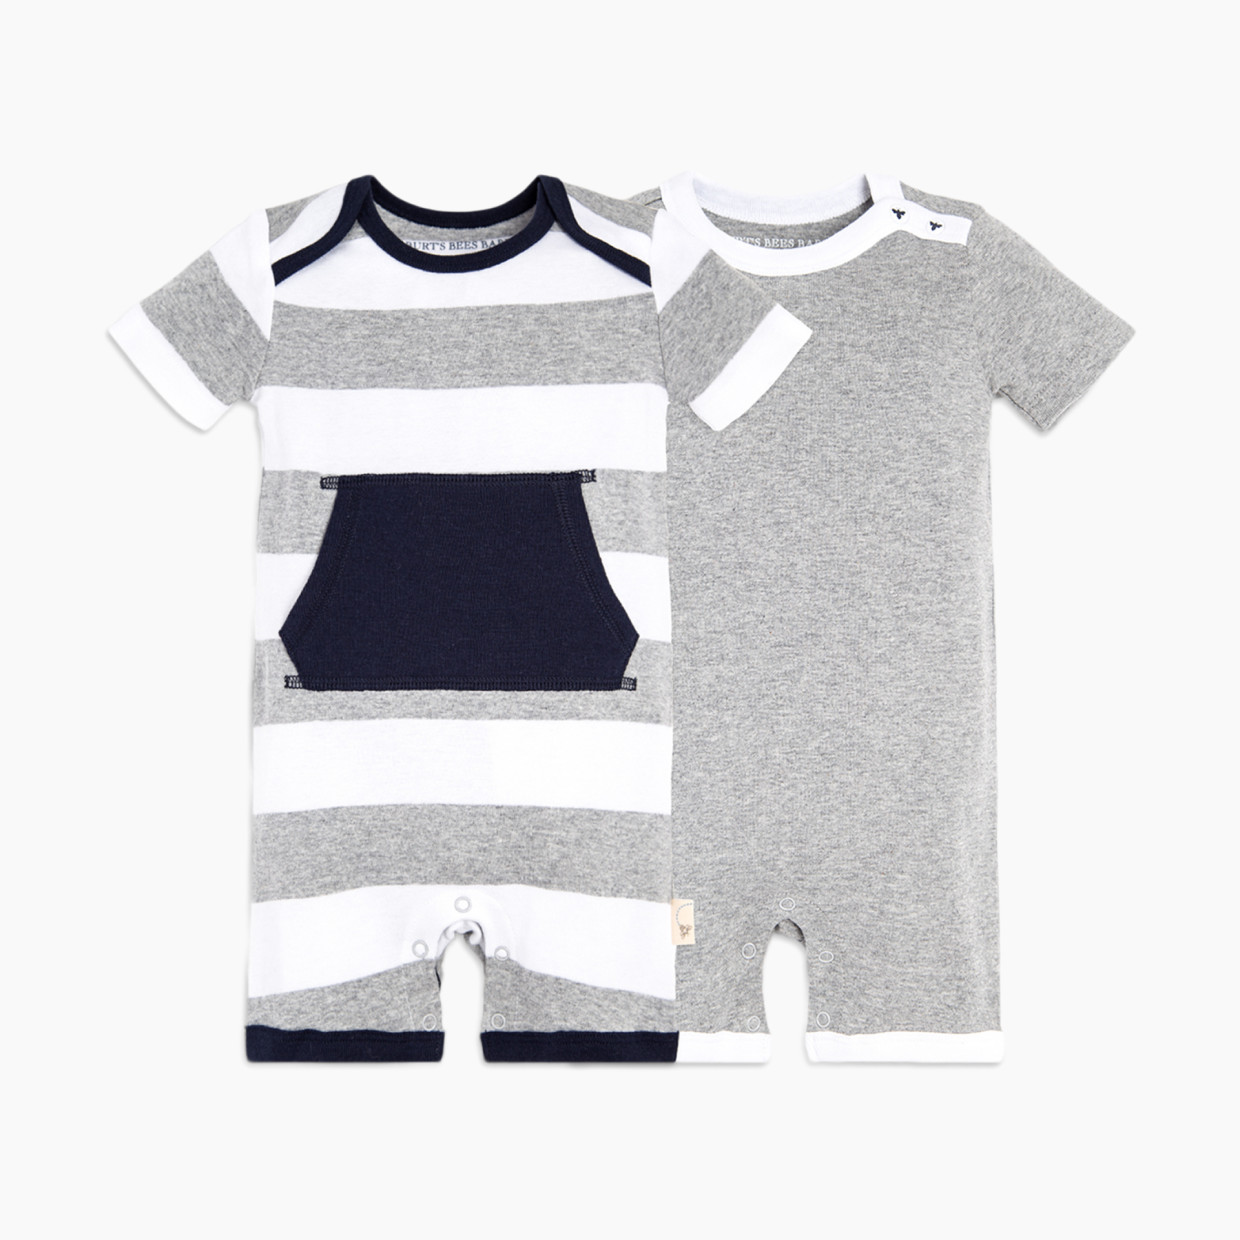 Burt's Bees Baby 2 Pack Rompers - Heather Grey Pocket, 0-3 Months.